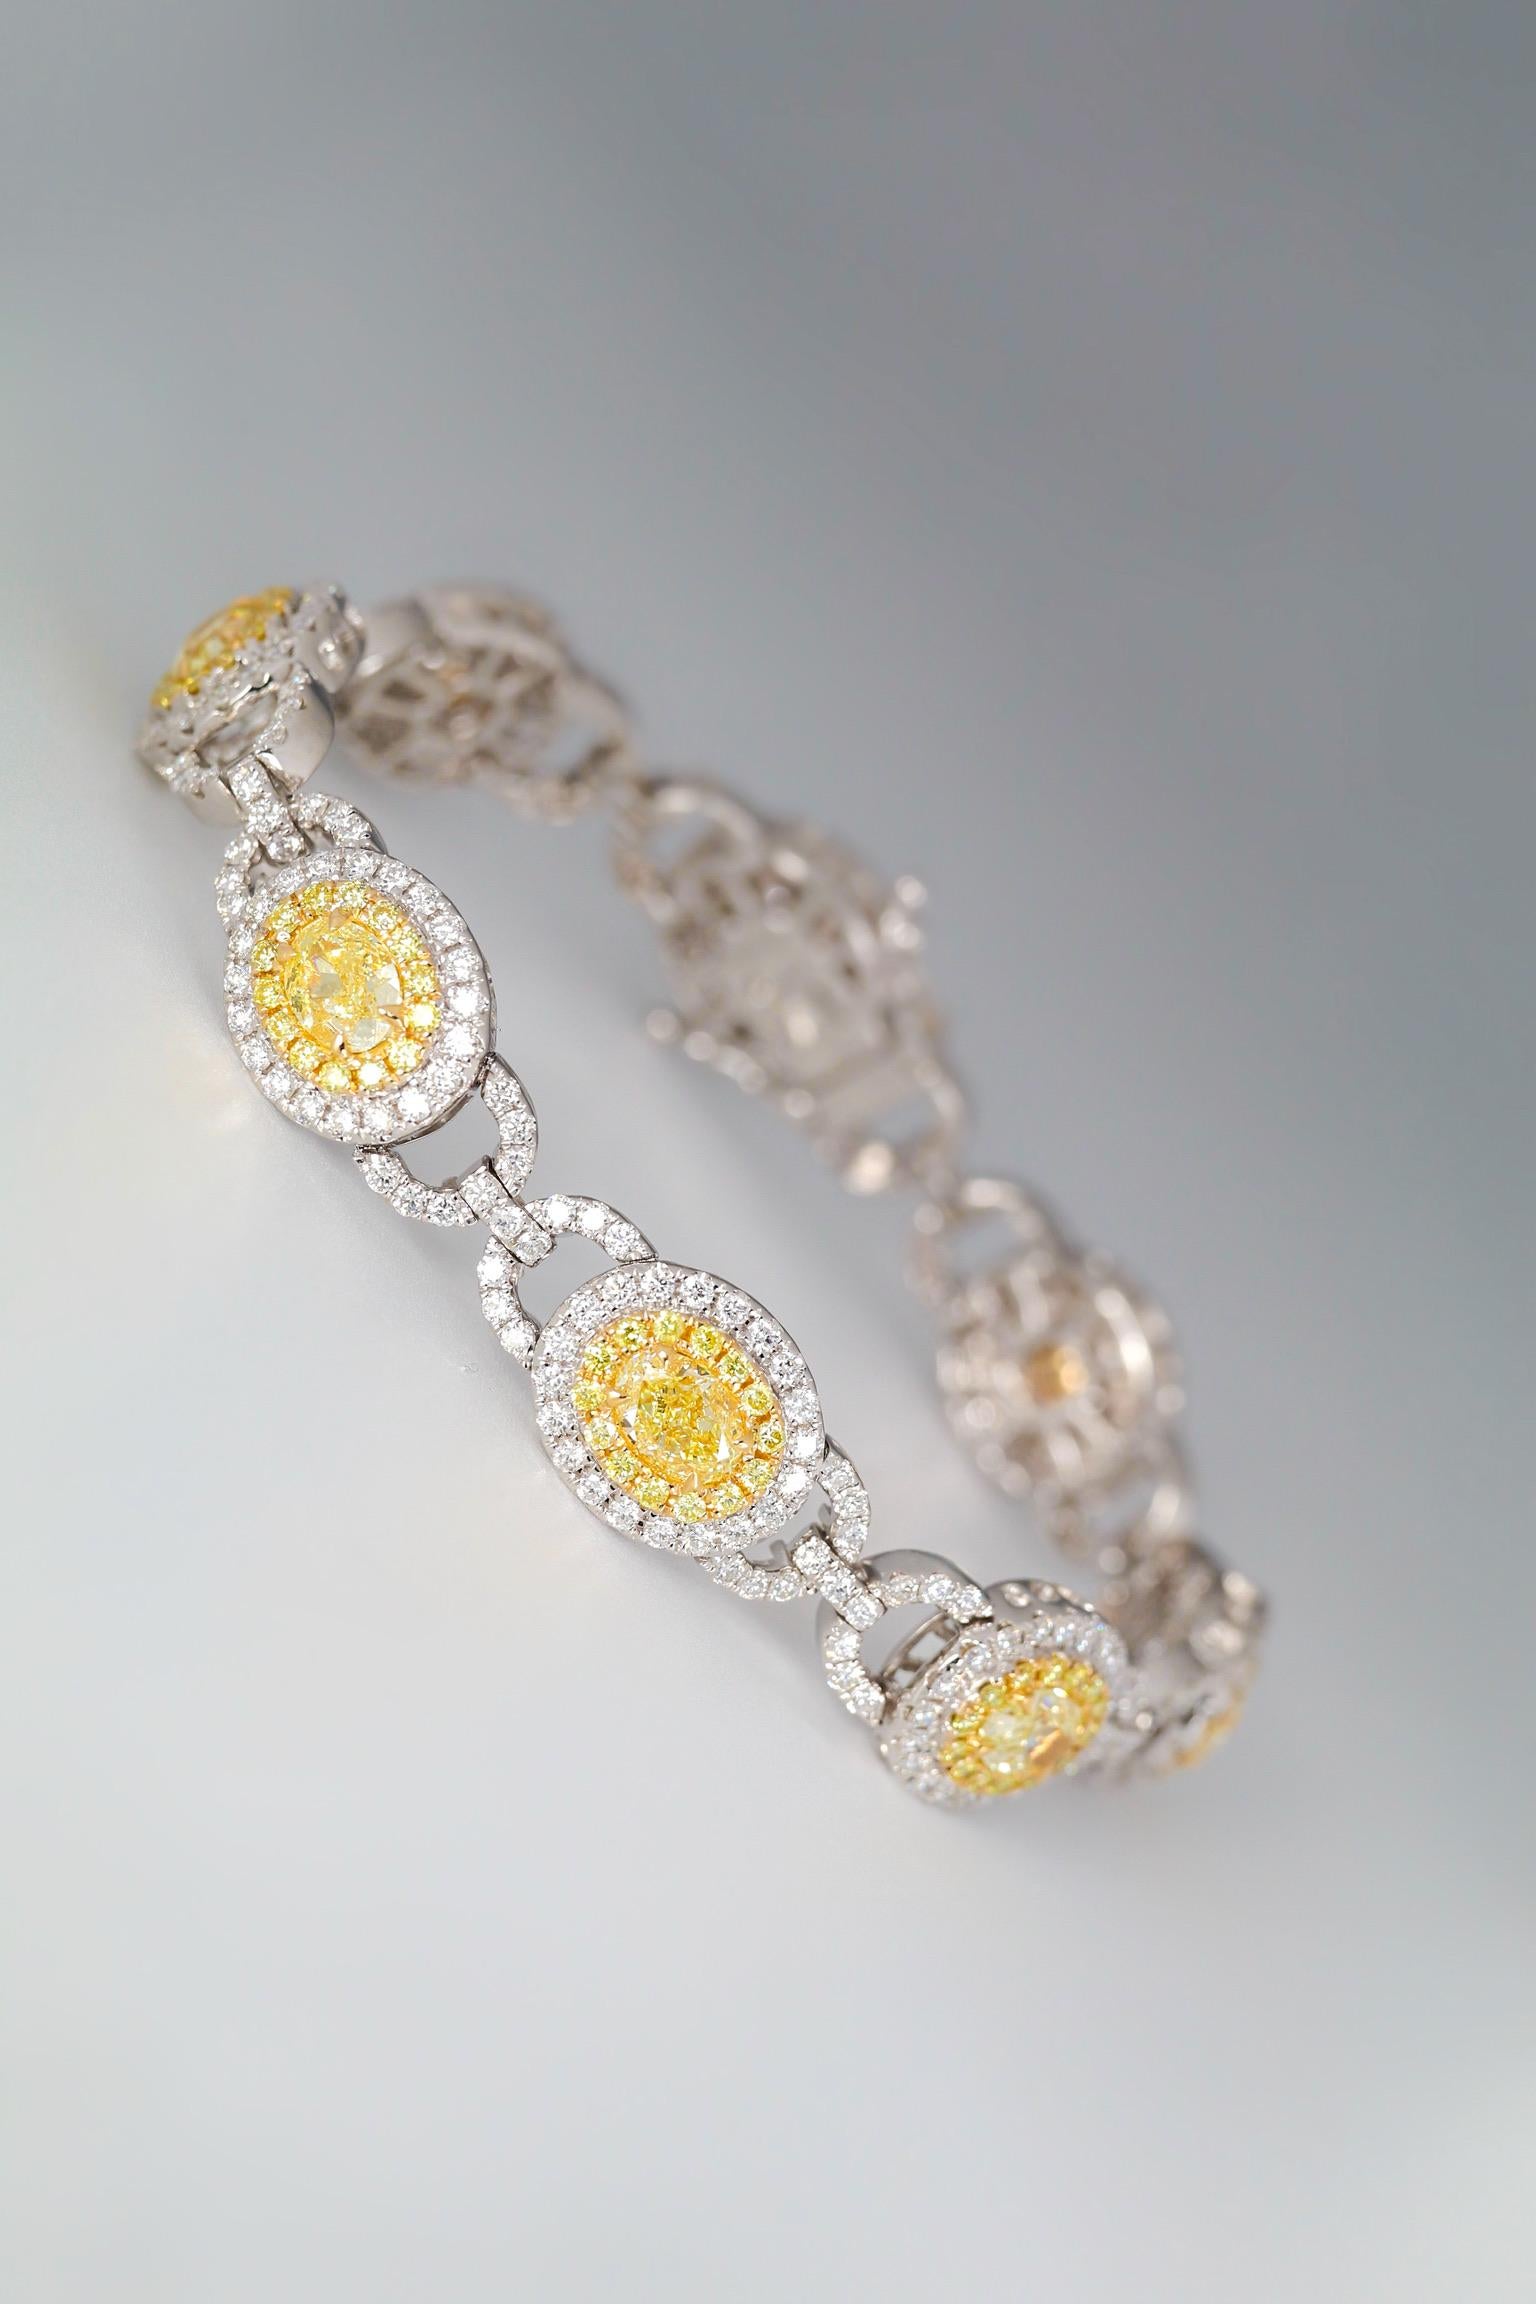 10.89 Carat Oval-Cut Yellow and White Diamond Bracelet, Set in 18K White Gold. For Sale 1